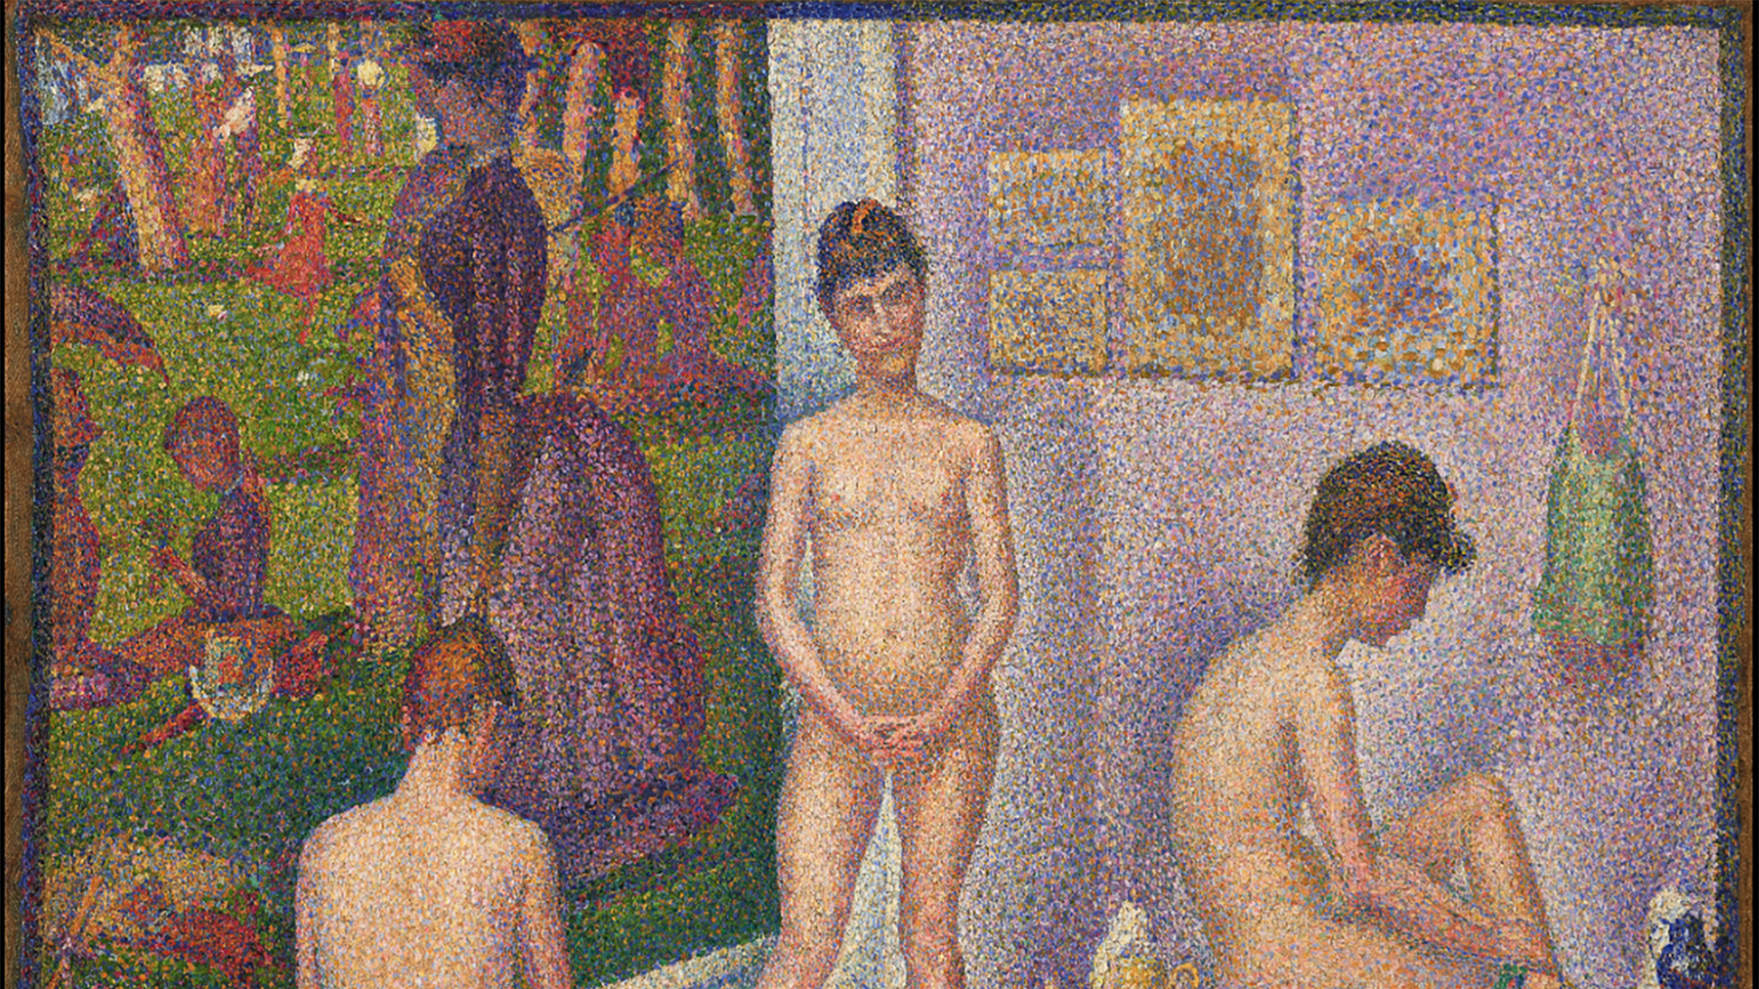 GEORGES SEURAT (1859-1891)
Les Poseuses, Ensemble (Petite version)
oil on canvas
15.1/2 x 19.3/4 in.(39.3 x 50 cm.)
Painted in 1888
Estimate on request, in excess of $100,000,000